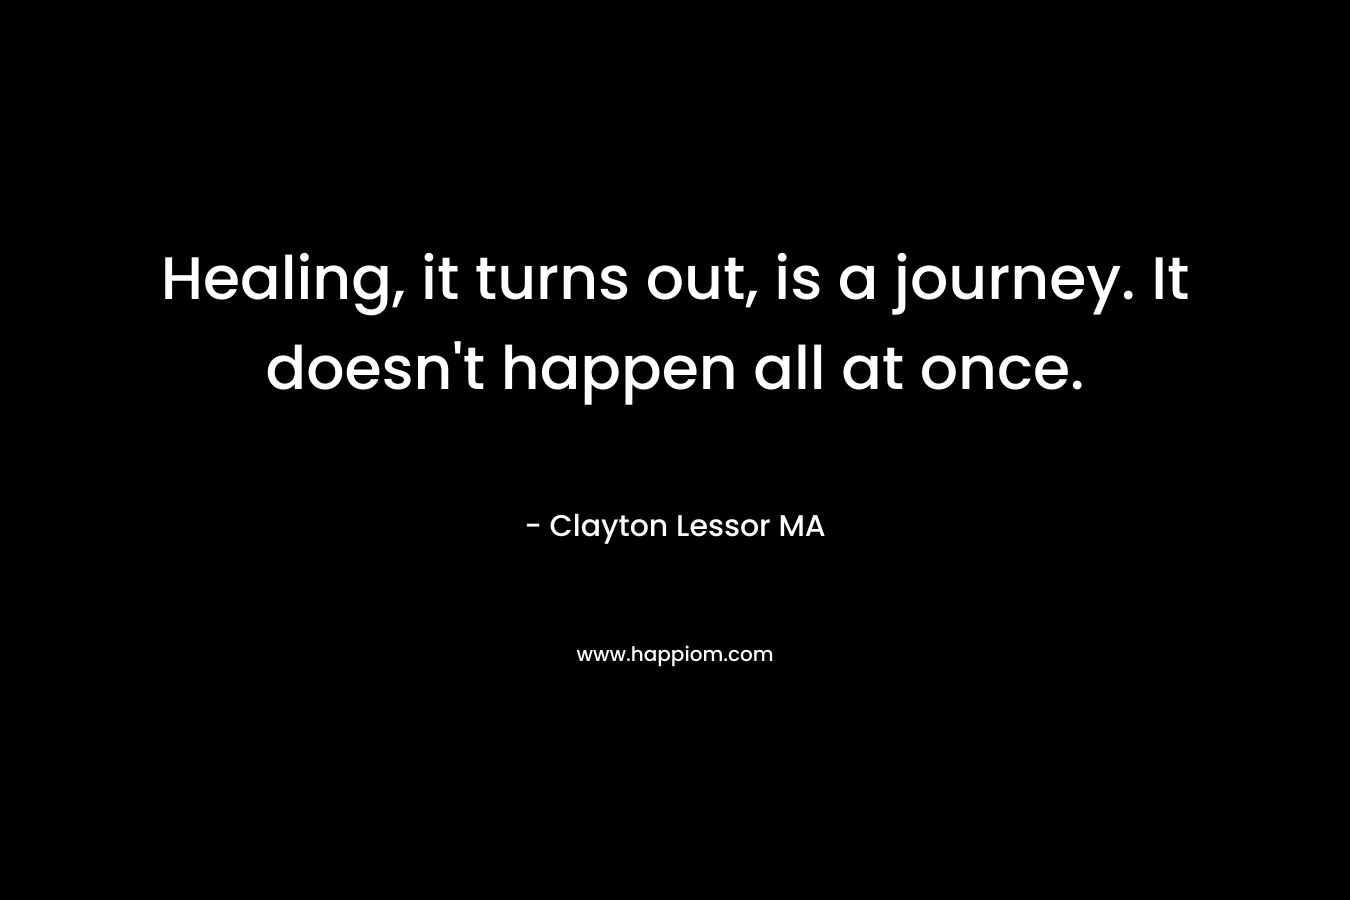 Healing, it turns out, is a journey. It doesn’t happen all at once. – Clayton Lessor MA